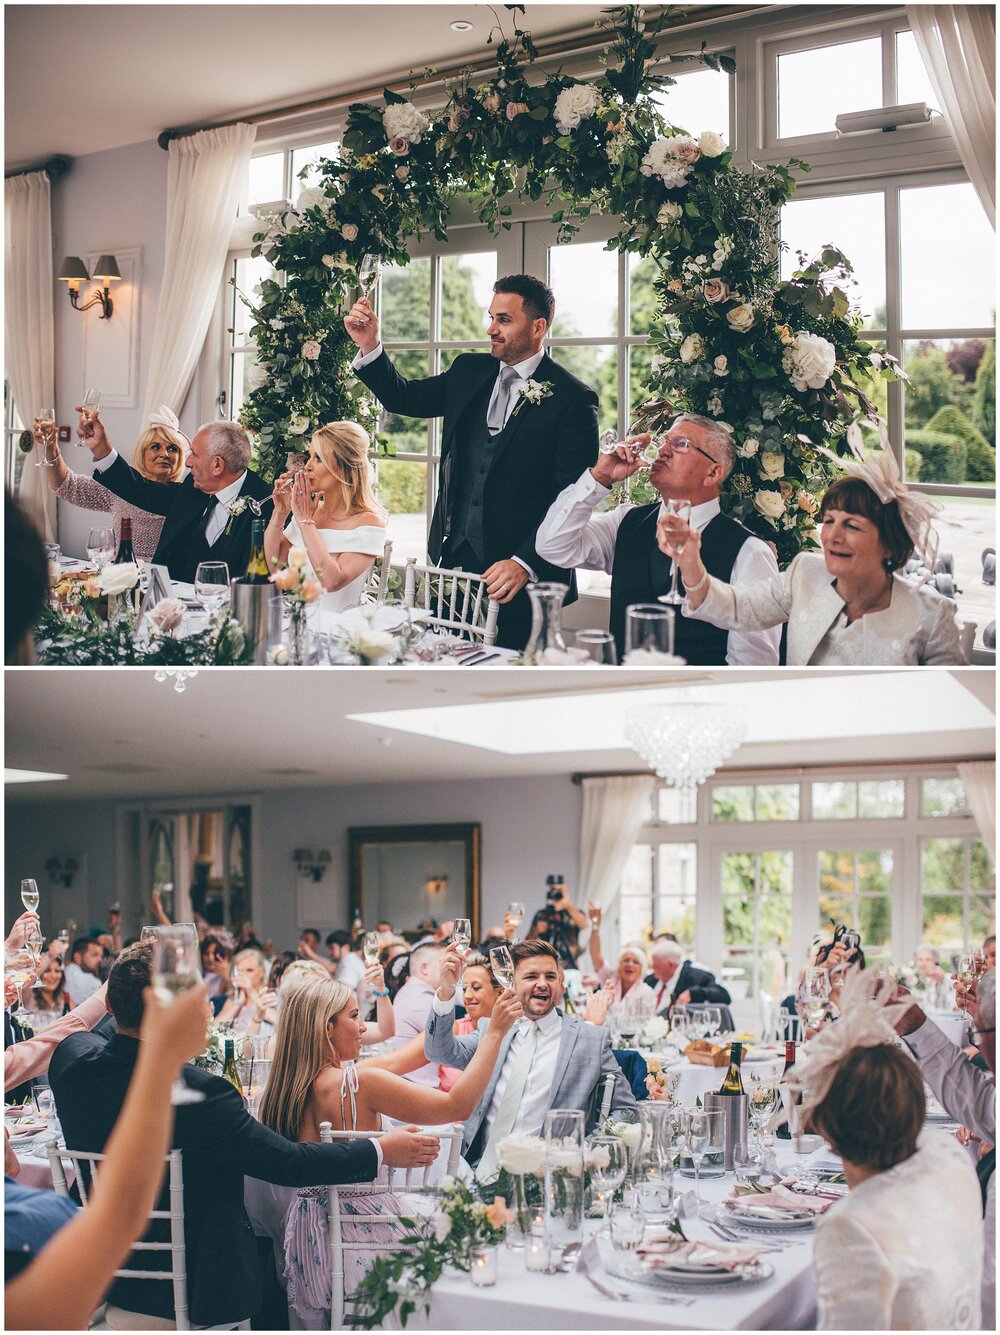 Wedding speeches take place in the Beautiful bright and airy wedding breakfast room at Lemore Manor.